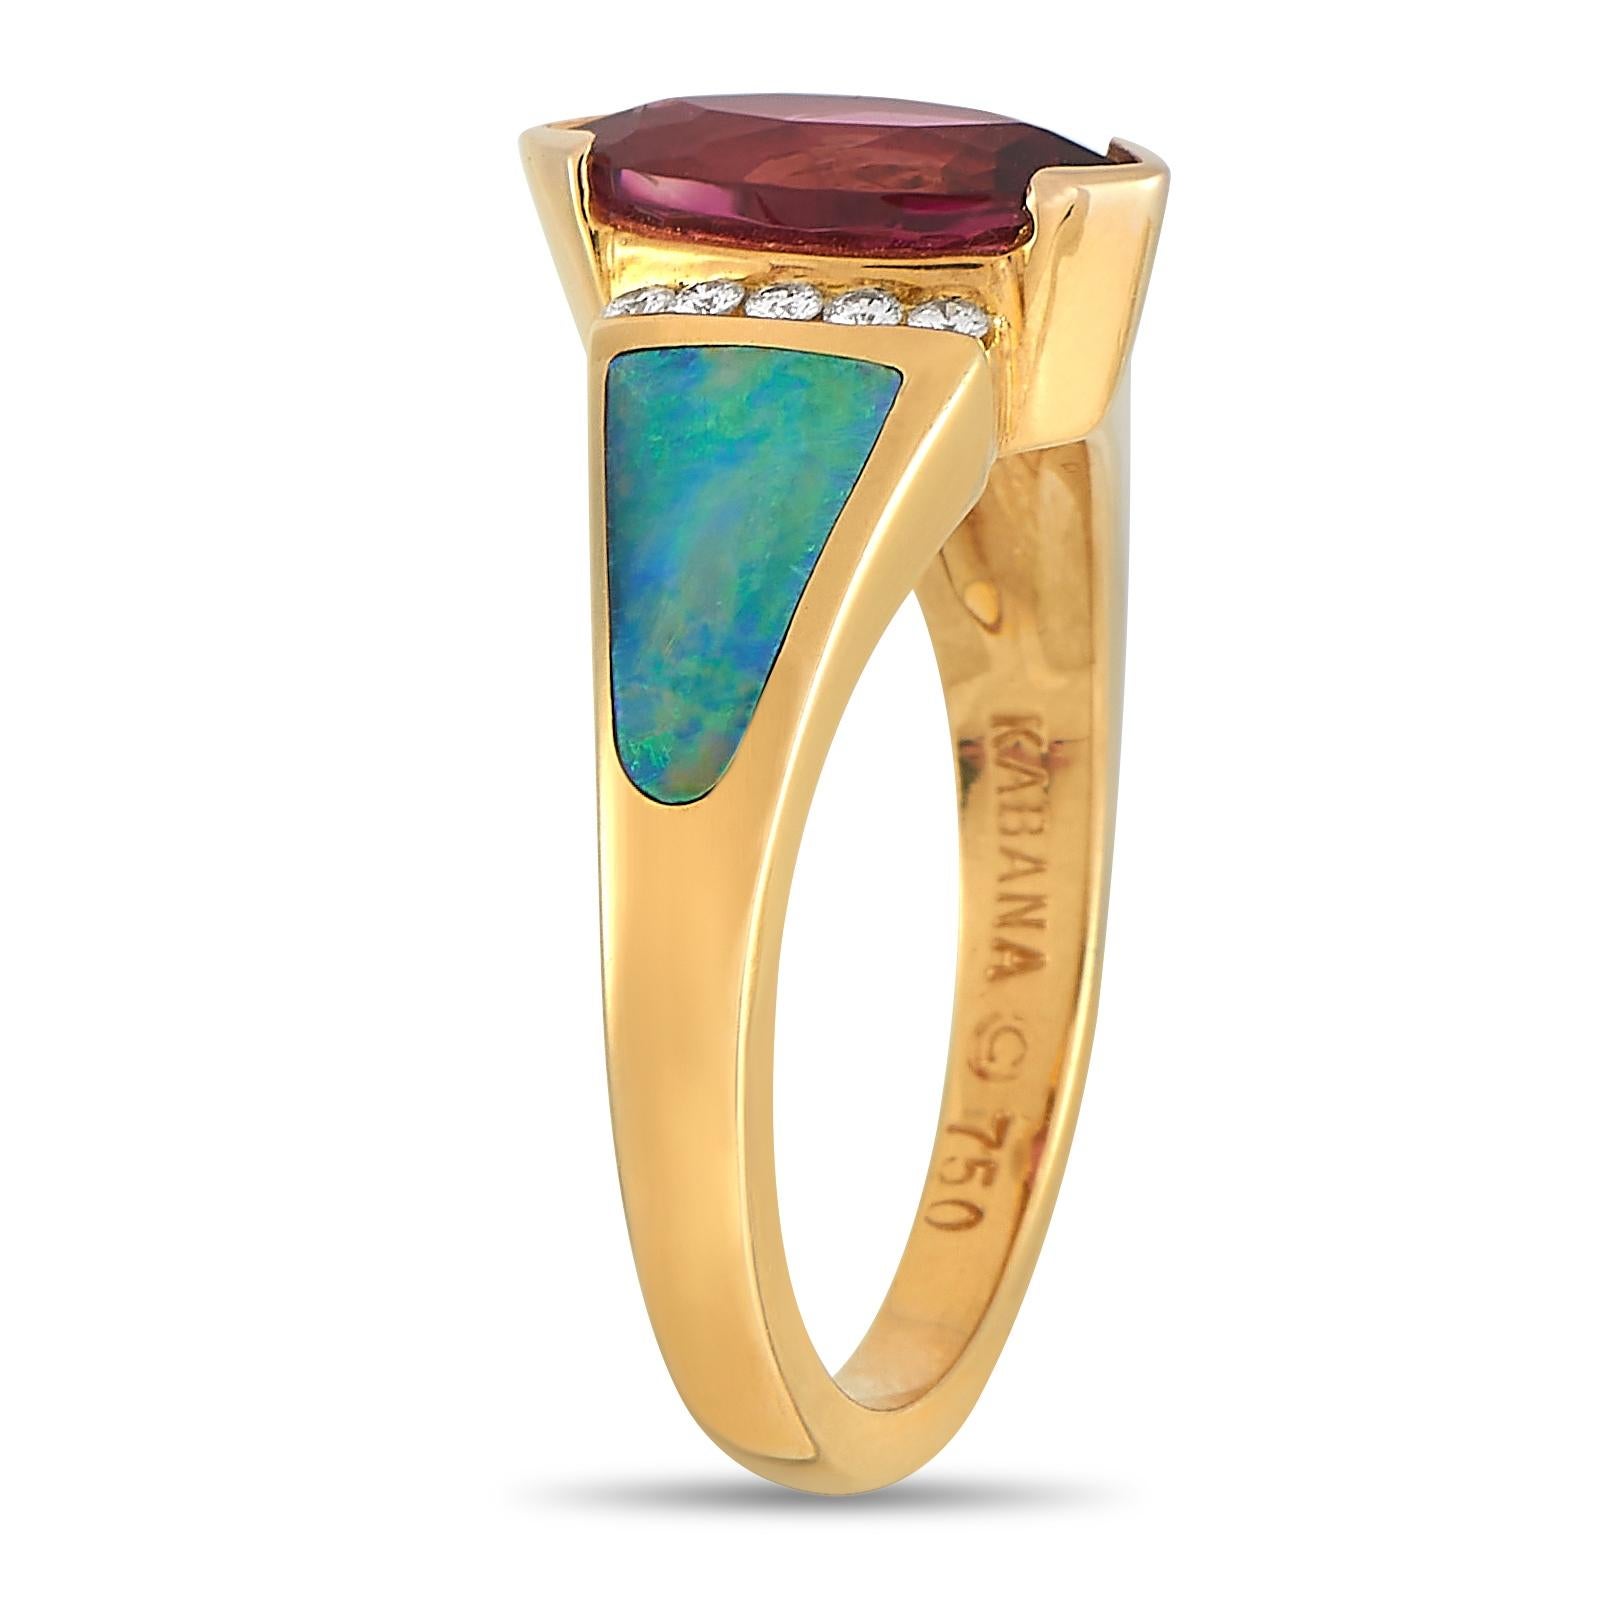 This Kabana ring is an exceptional piece that blends opulent colors and textures. At the center of the 14K Yellow Gold setting, a marquise-cut red 1.60 carat tourmaline makes a stylish statement. It’s accented by fiery inlaid opal as well as 0.15